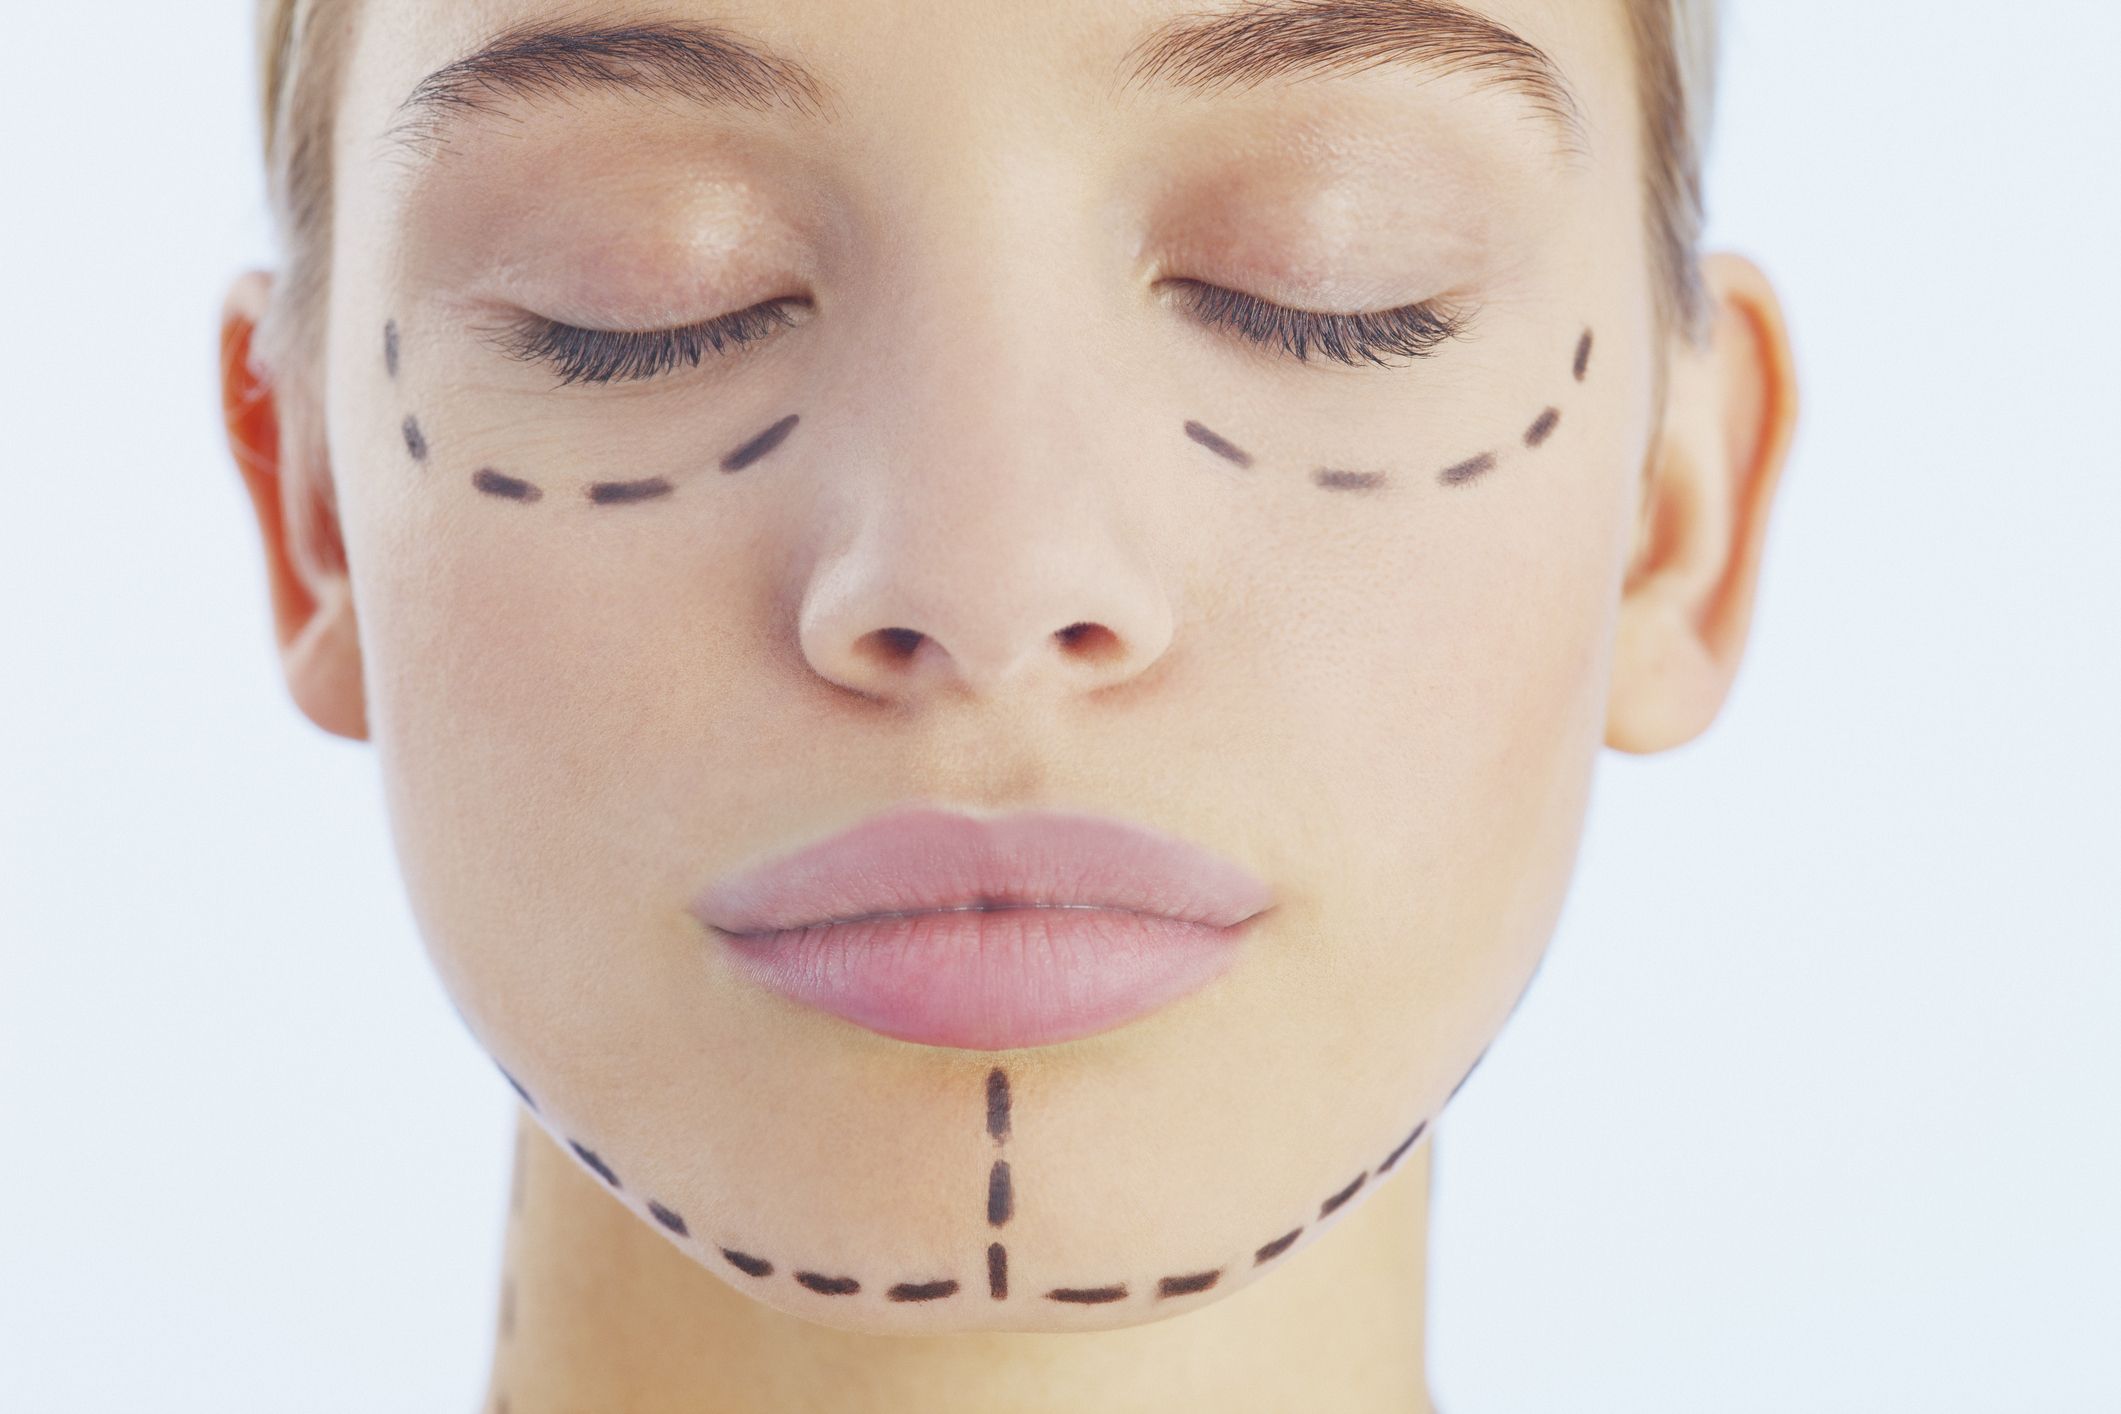 Here's What You Need to Know Before Getting Plastic Surgery